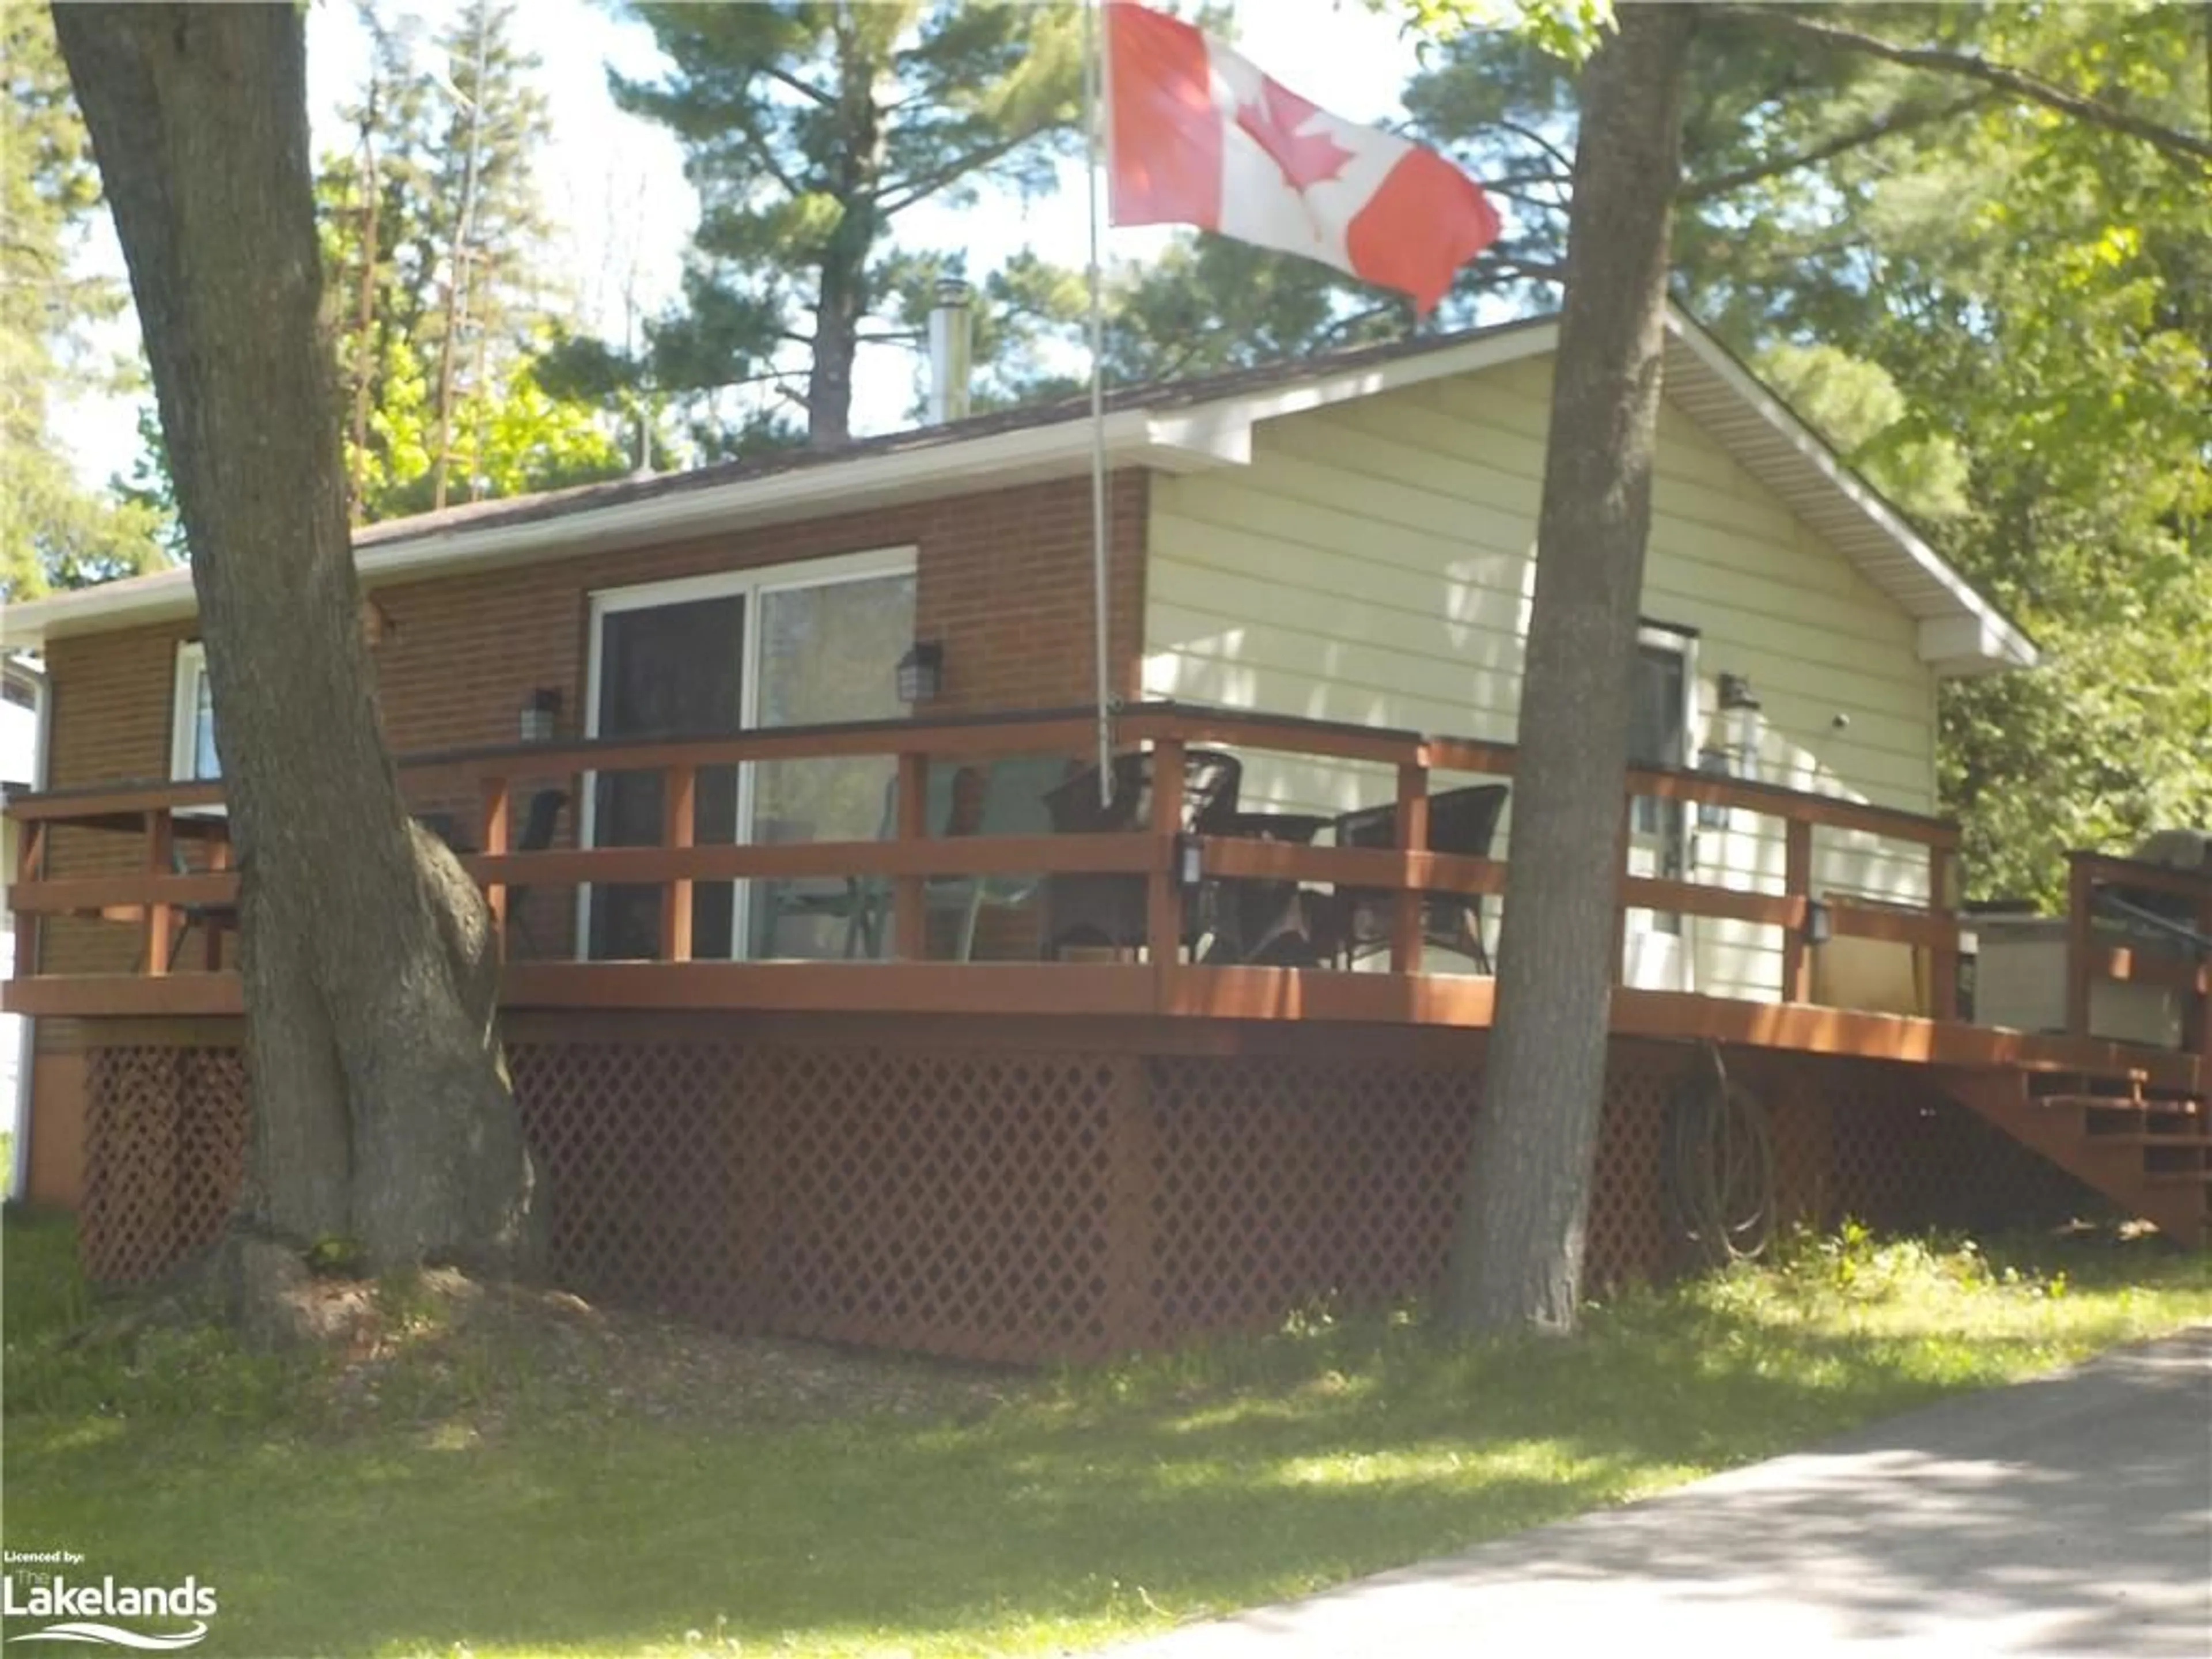 Cottage for 224 Lake Dalrymple Rd, Sebright Ontario L0K 1W0